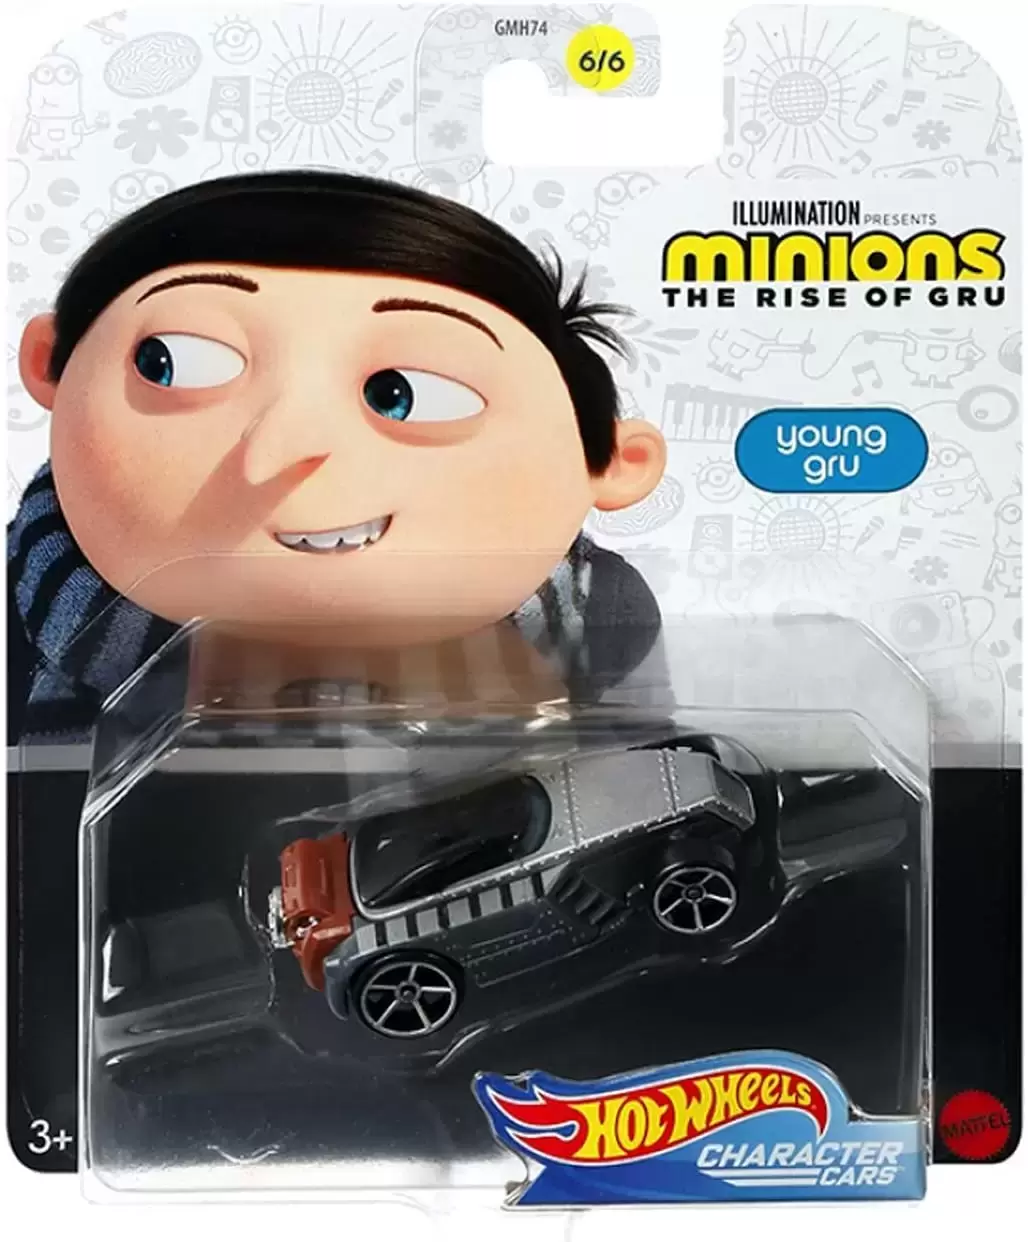 Hot Wheels Minions: The Rise Of Gru Character Cars - Young Gru